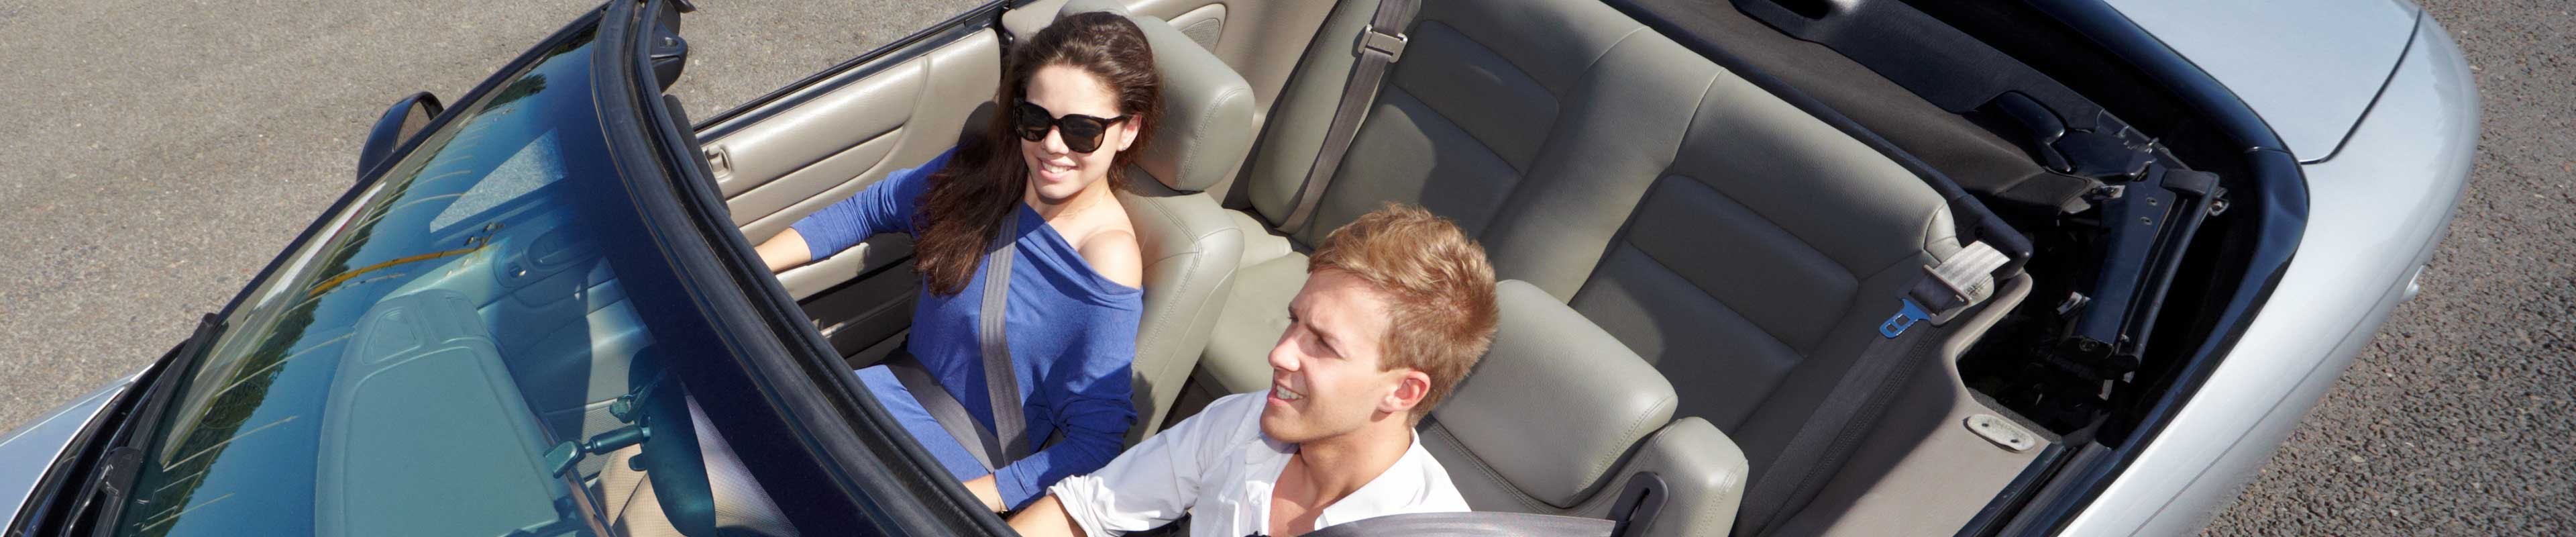 Image of a couple test driving a car.  